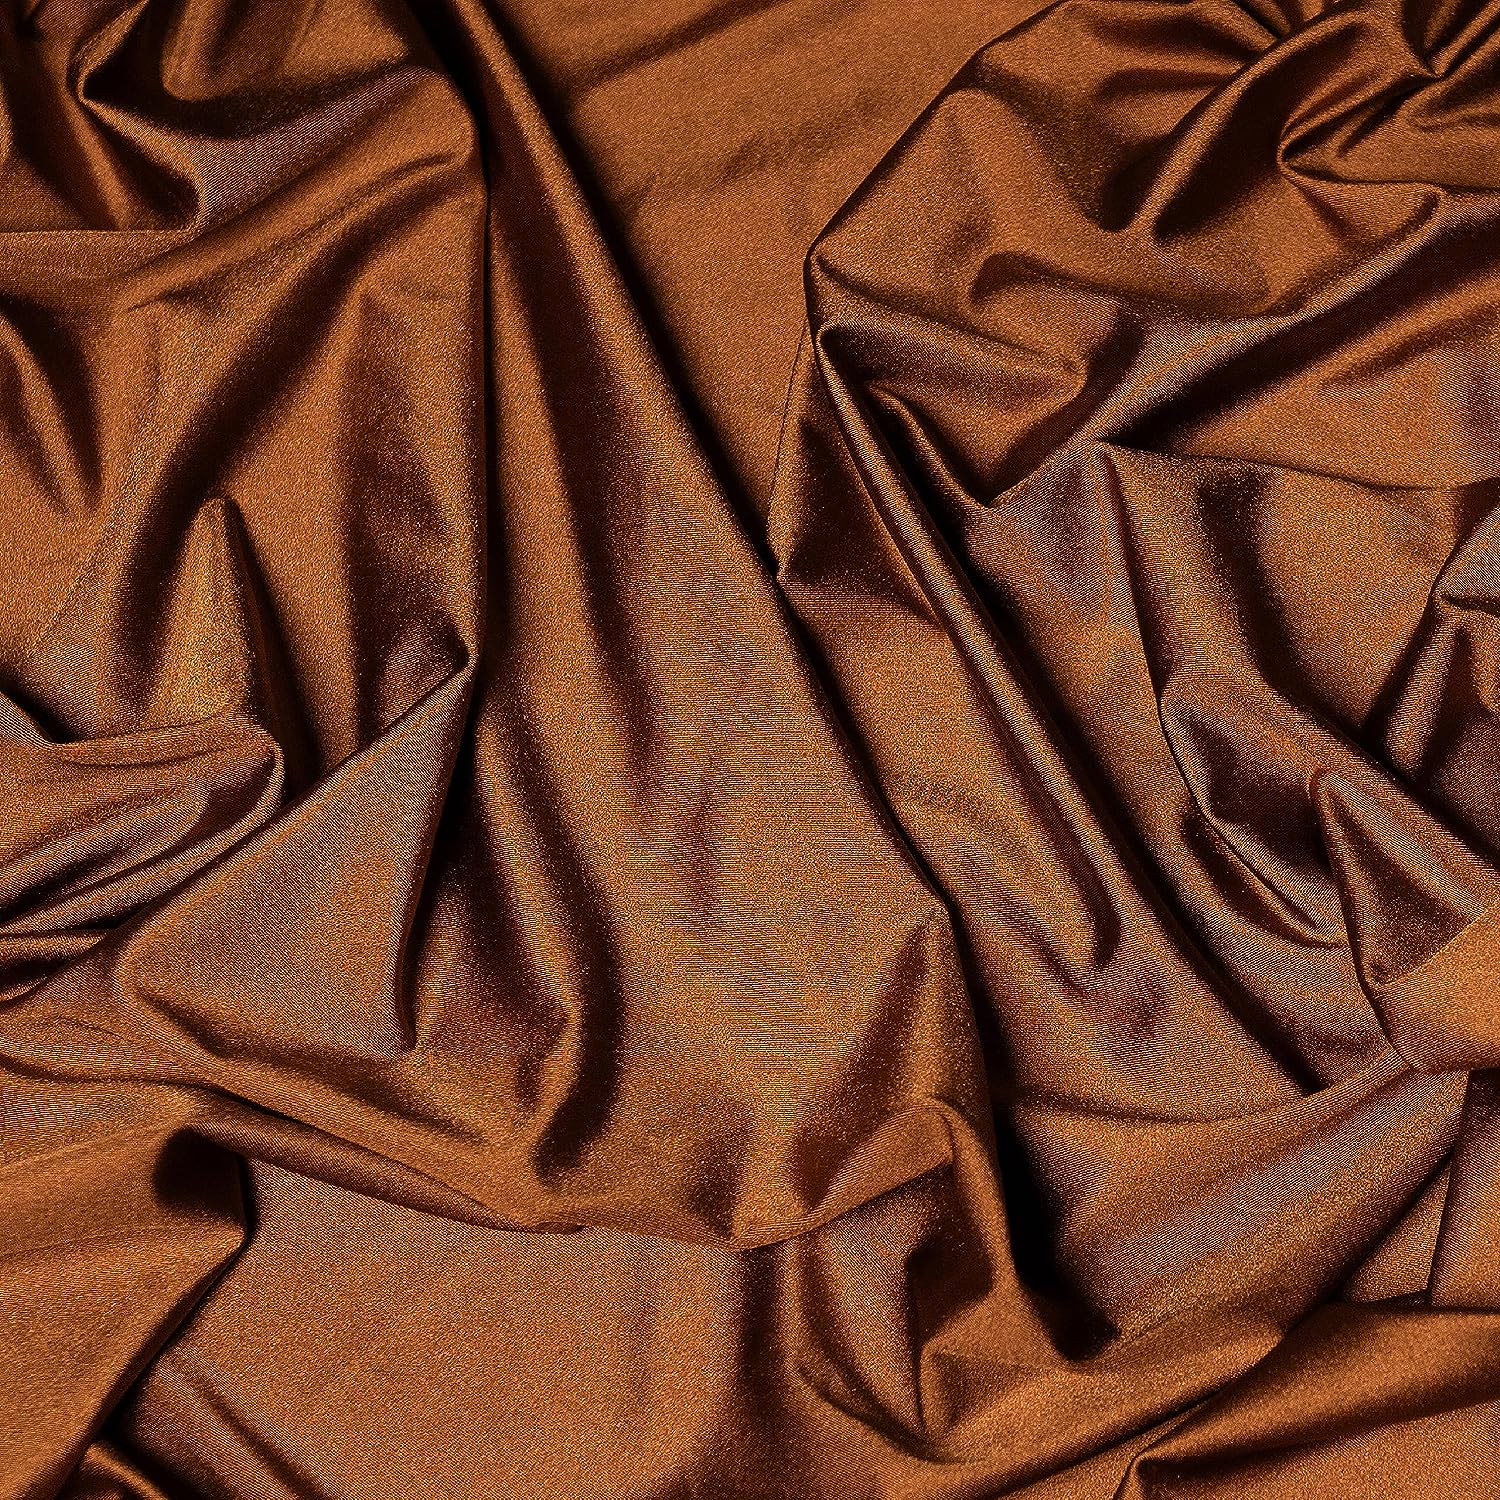 BROWN SNAKE PRINT STRETCH LYCRA FABRIC 58 BY THE YARD GLOSSY